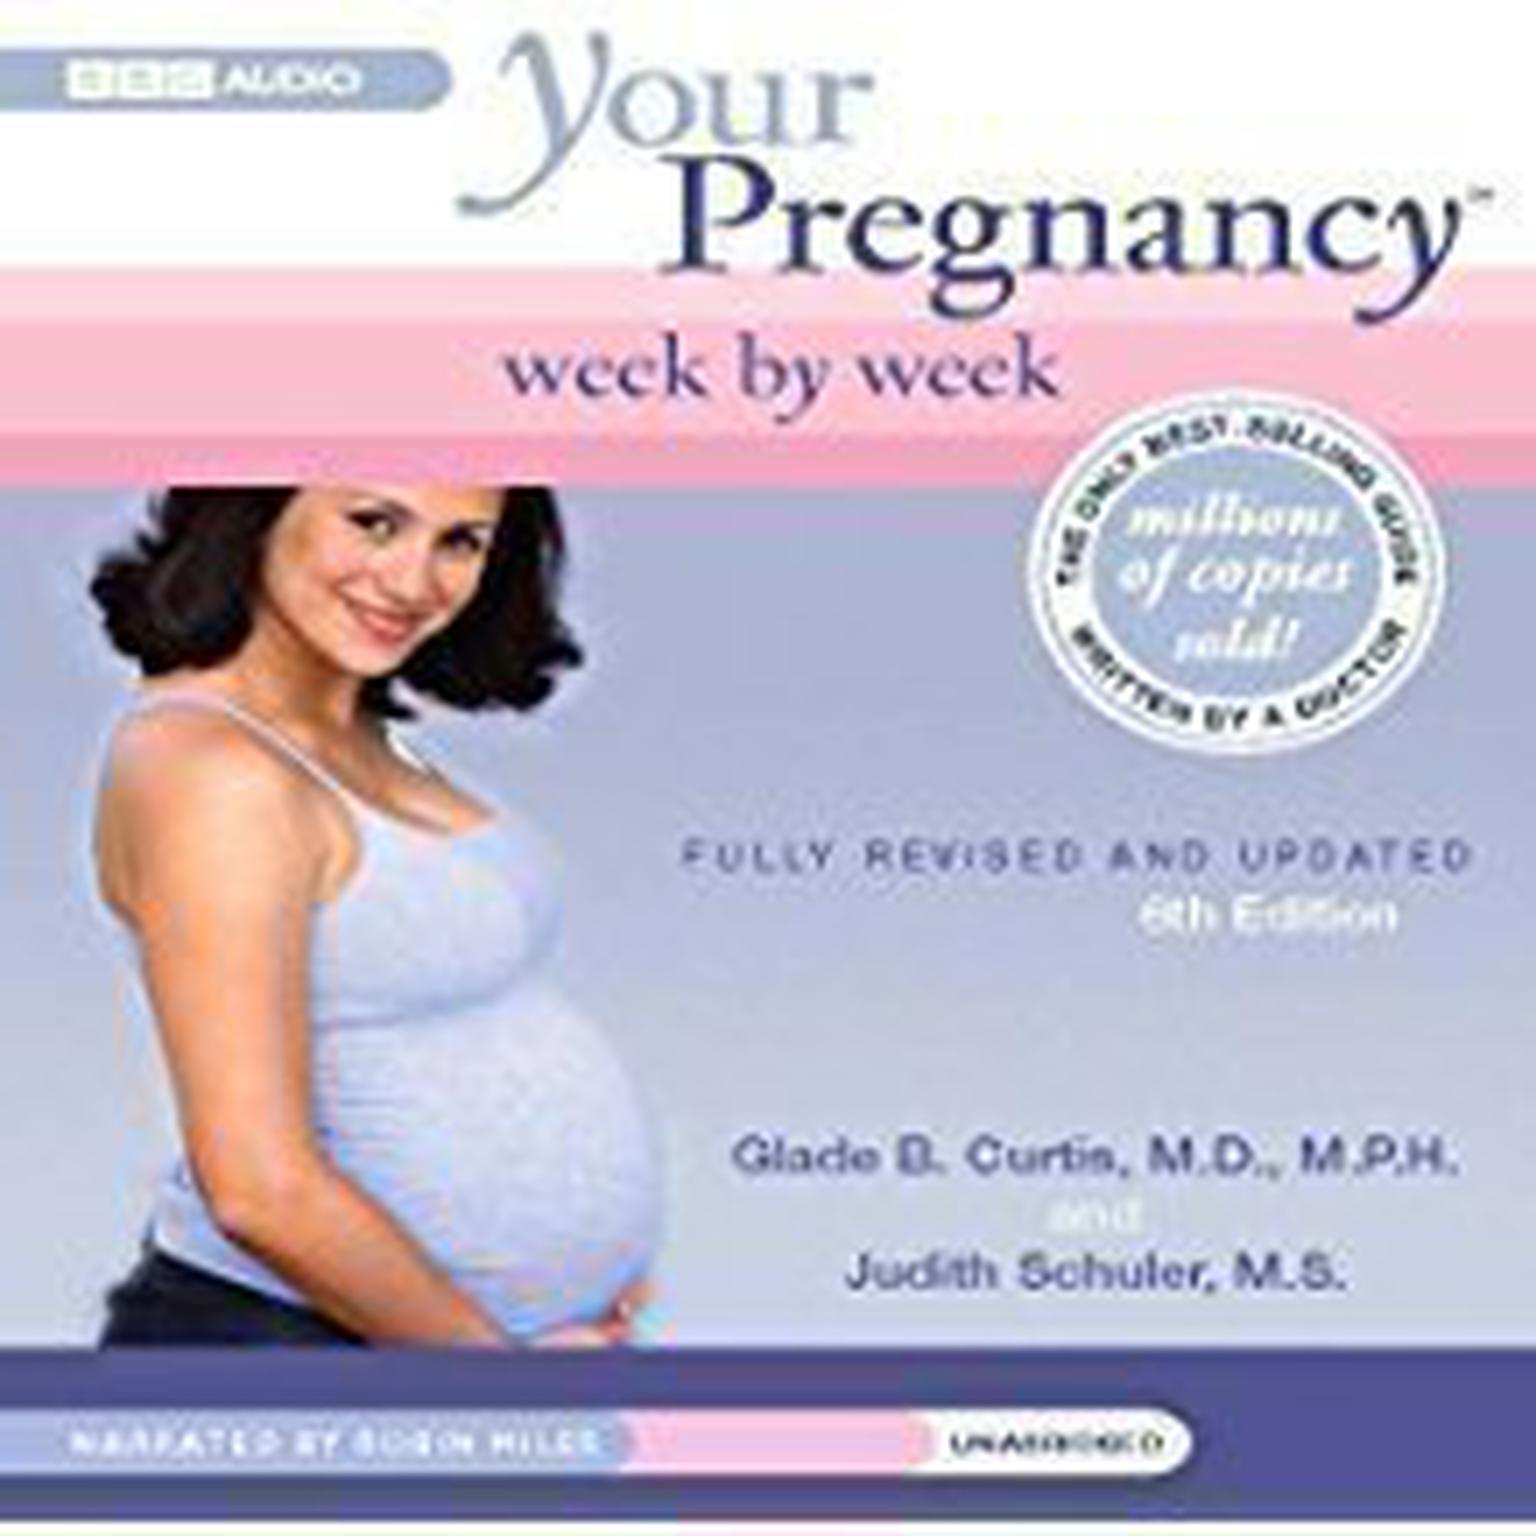 Your Pregnancy Week by Week, Third Trimester Audiobook, by Glade B. Curtis